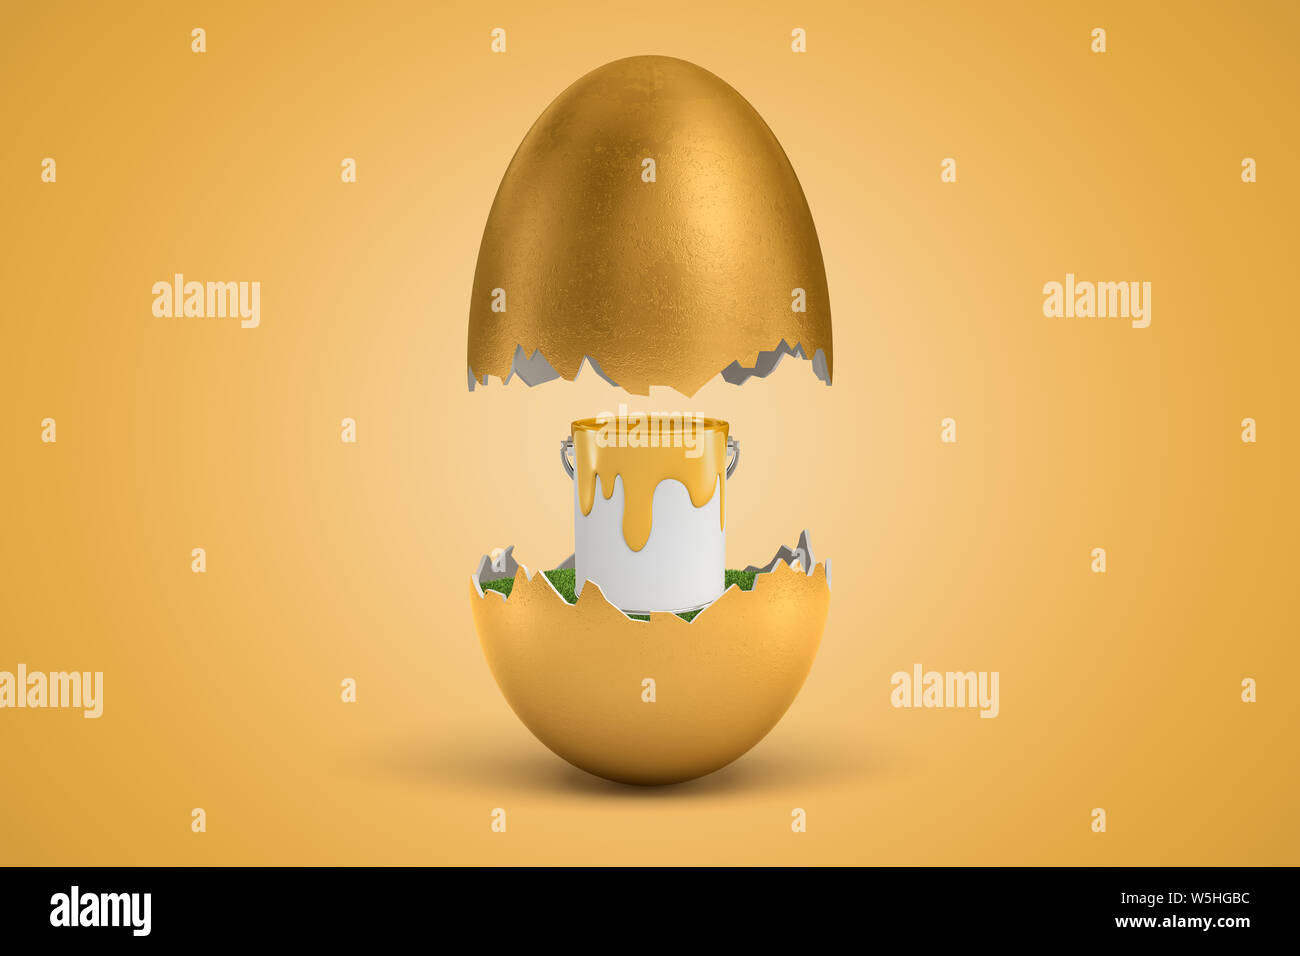 Download 3d Rendering Of Yellow Paint Bucket Hatching Out Of Golden Egg On Yellow Background Stock Photo Alamy Yellowimages Mockups